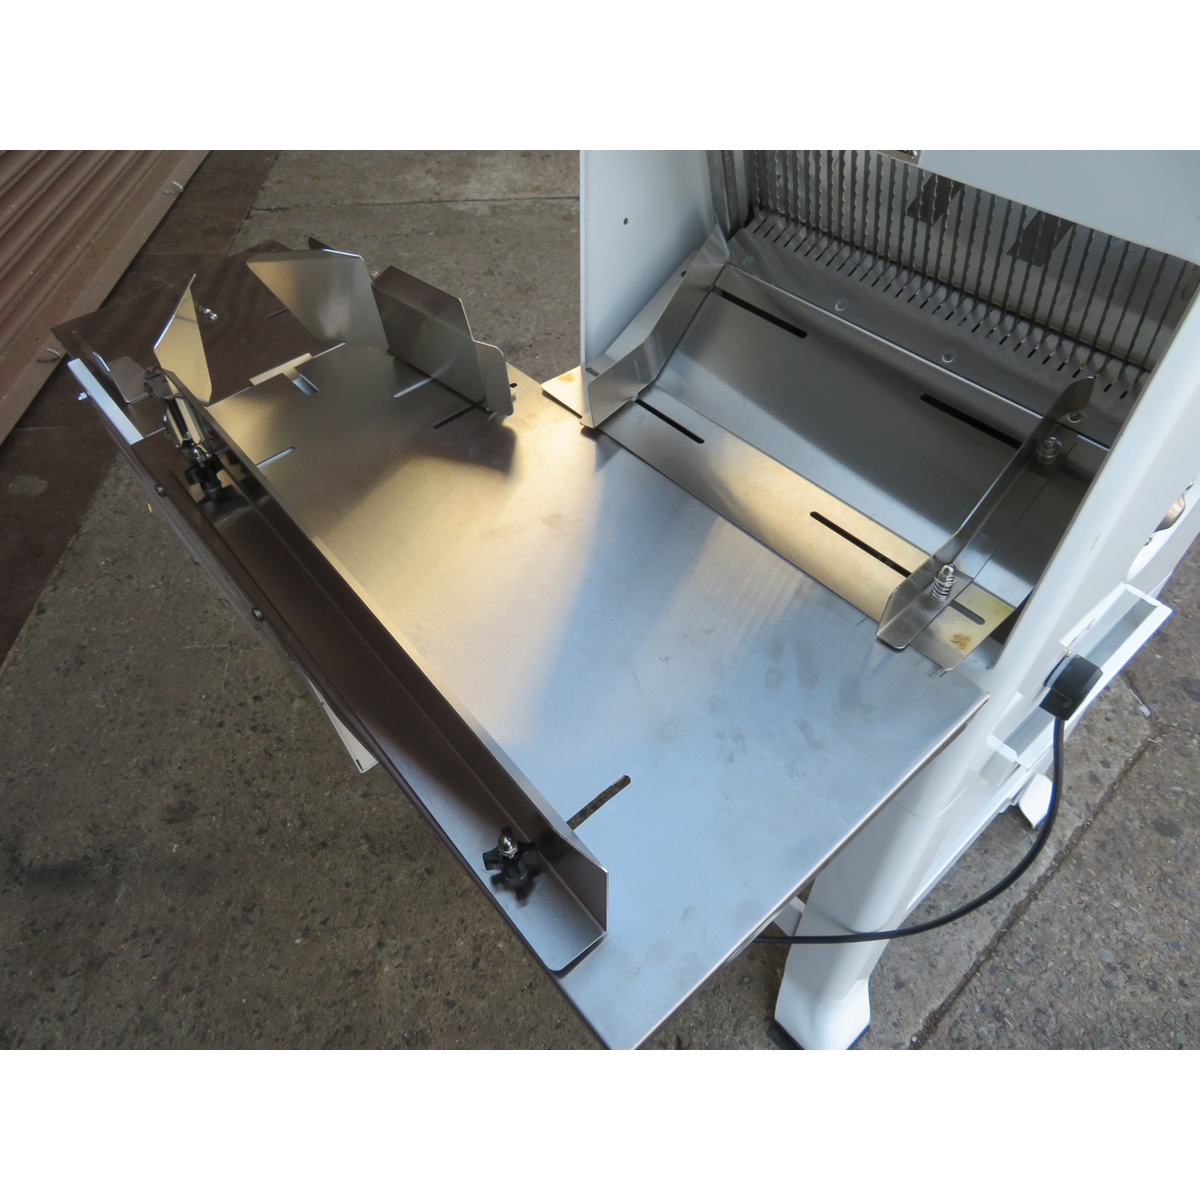 Oliver 797 Gravity Feed Bread Slicer  W/ 1197 Swing-Away Bagger , 1/2" Slices, Used Excellent Condition image 4